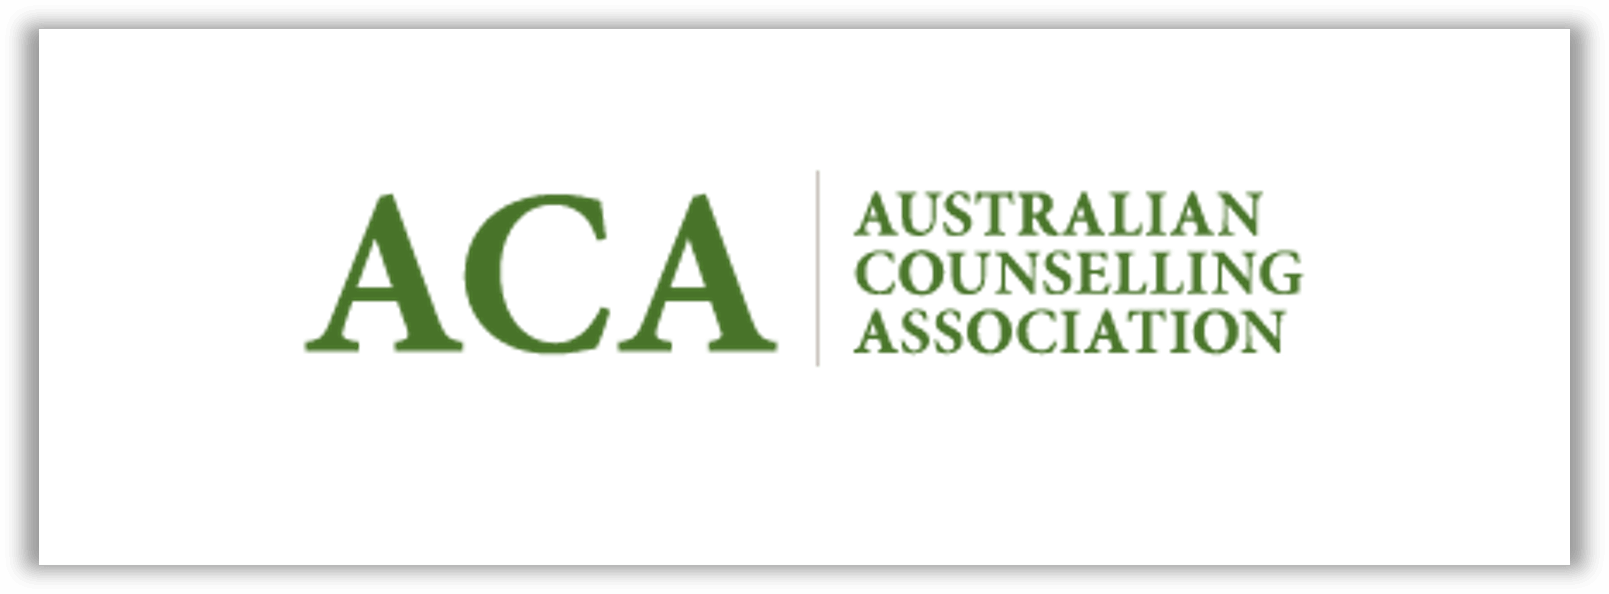 ACA logo. Green text and white background